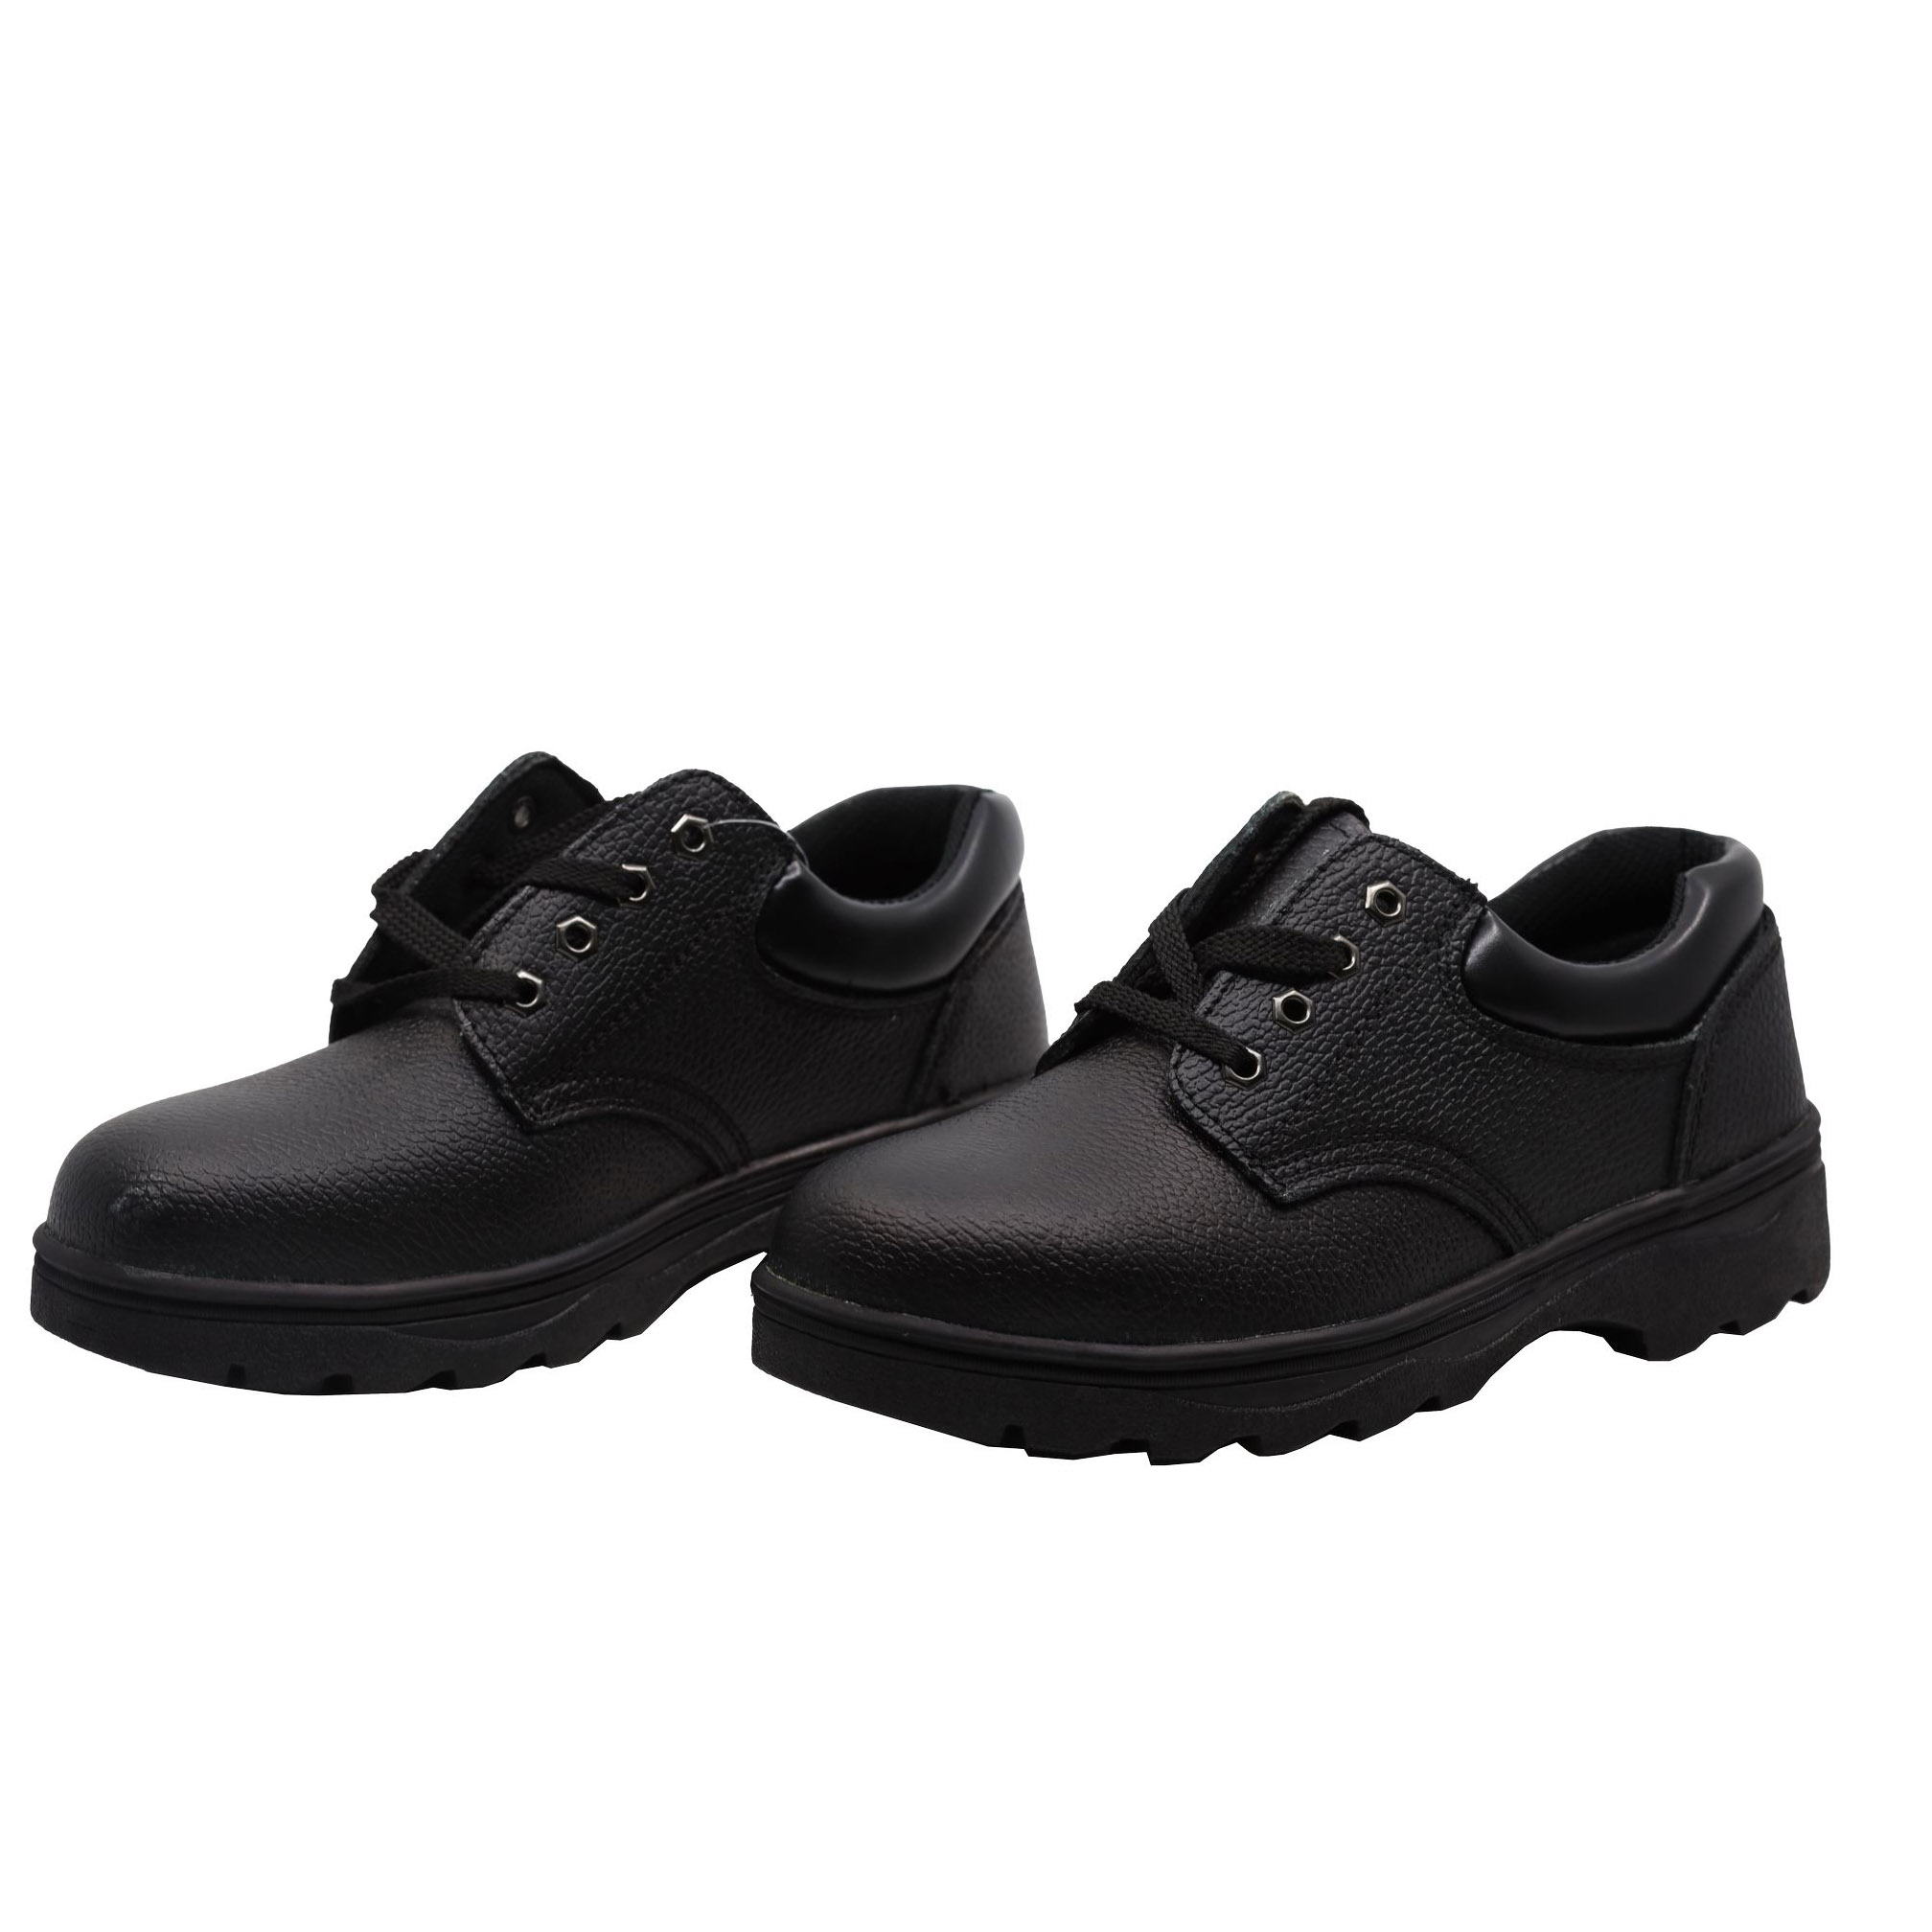 Buy SAFETY SHOES 43" - FASTO Online | Safety | Qetaat.com